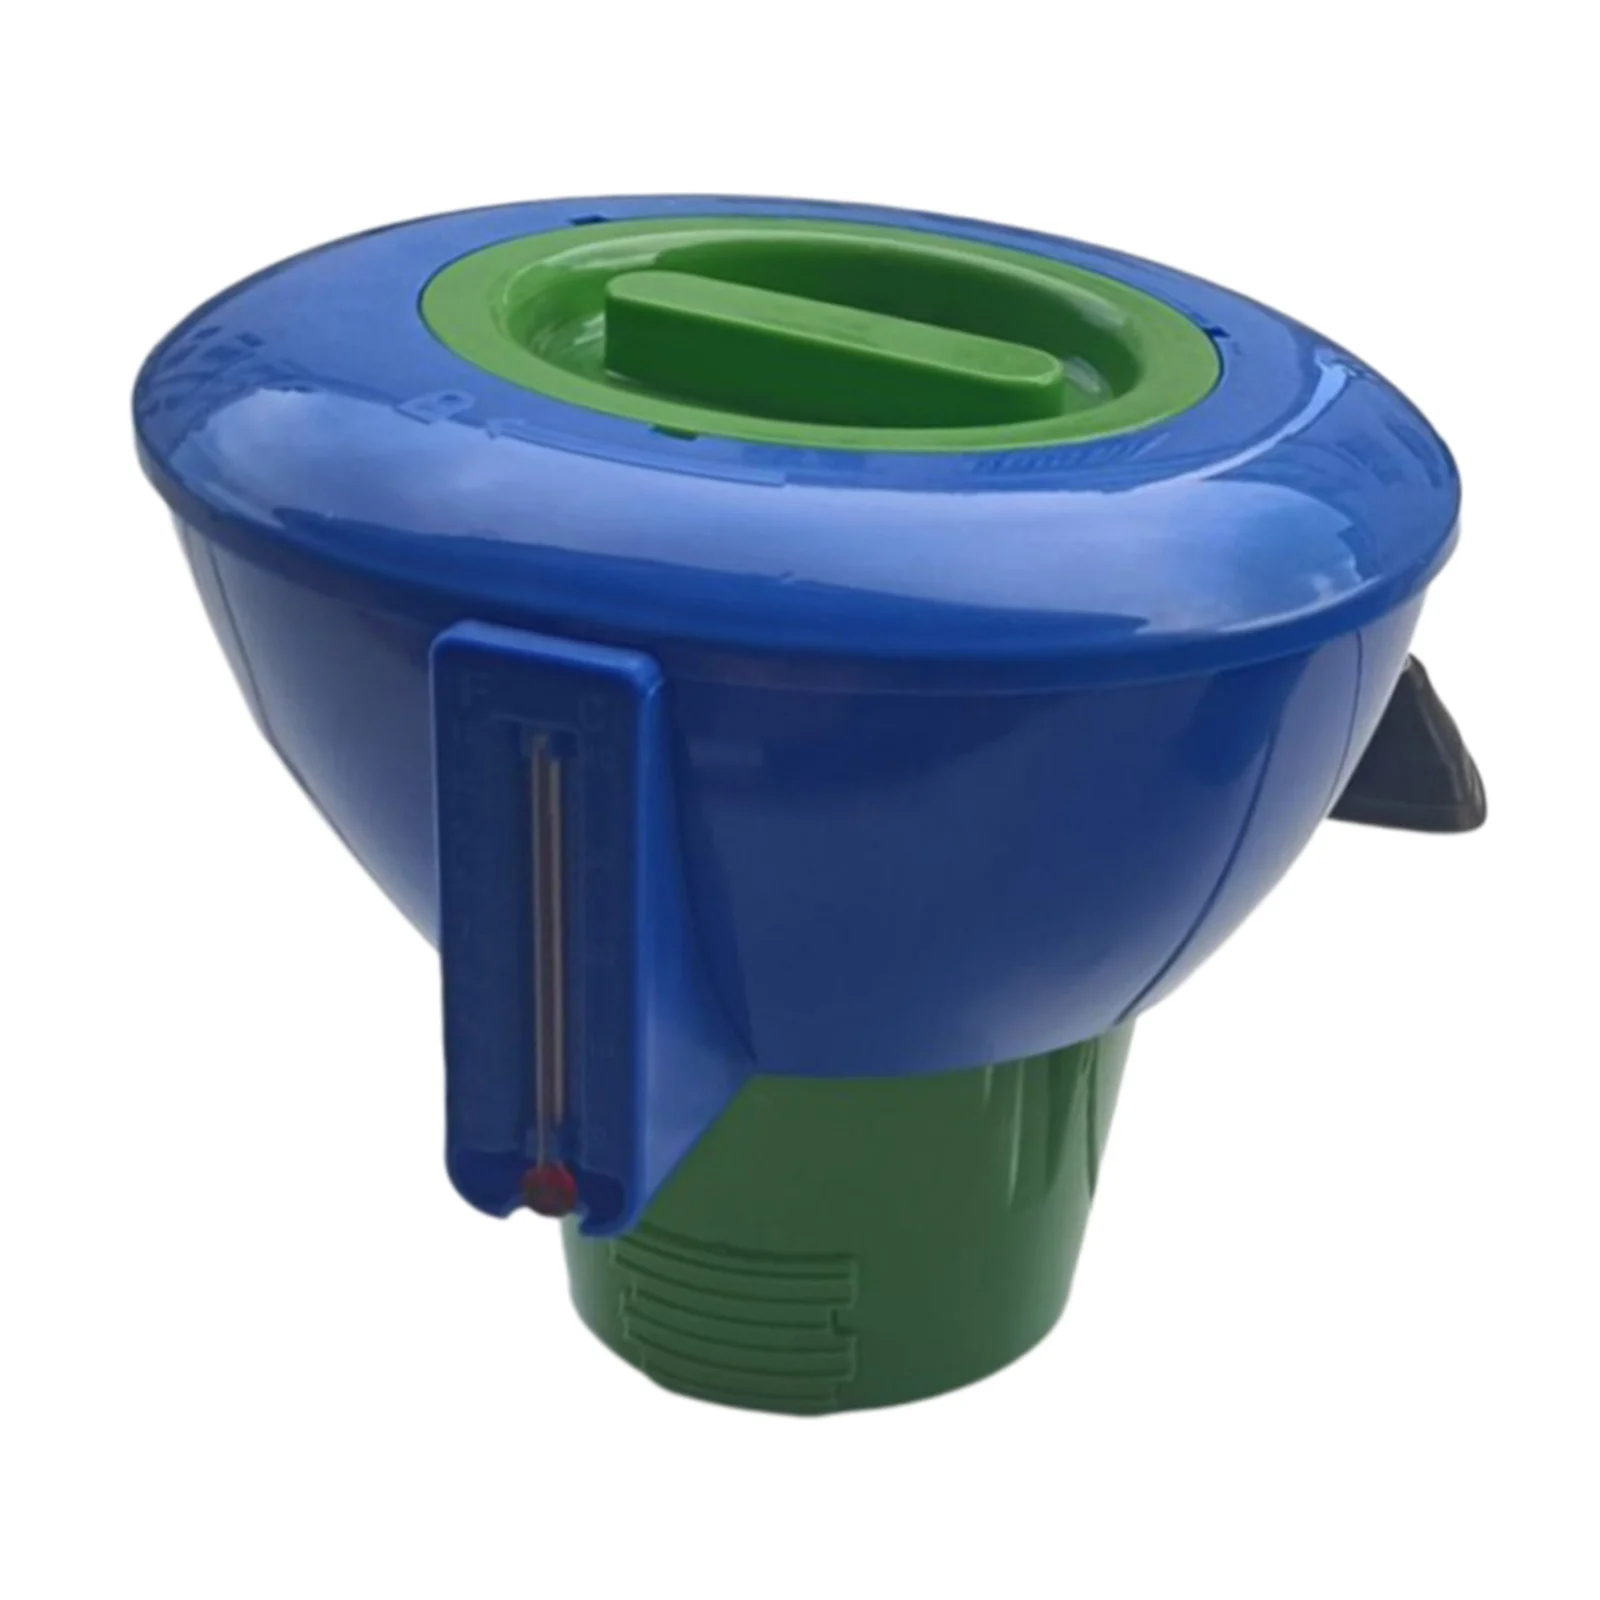 Large Floating Swimming Pool Chlorine Dispenser Bromine Tablet Automatic Dispenser Floating Home Outdoor Pool Cleaning